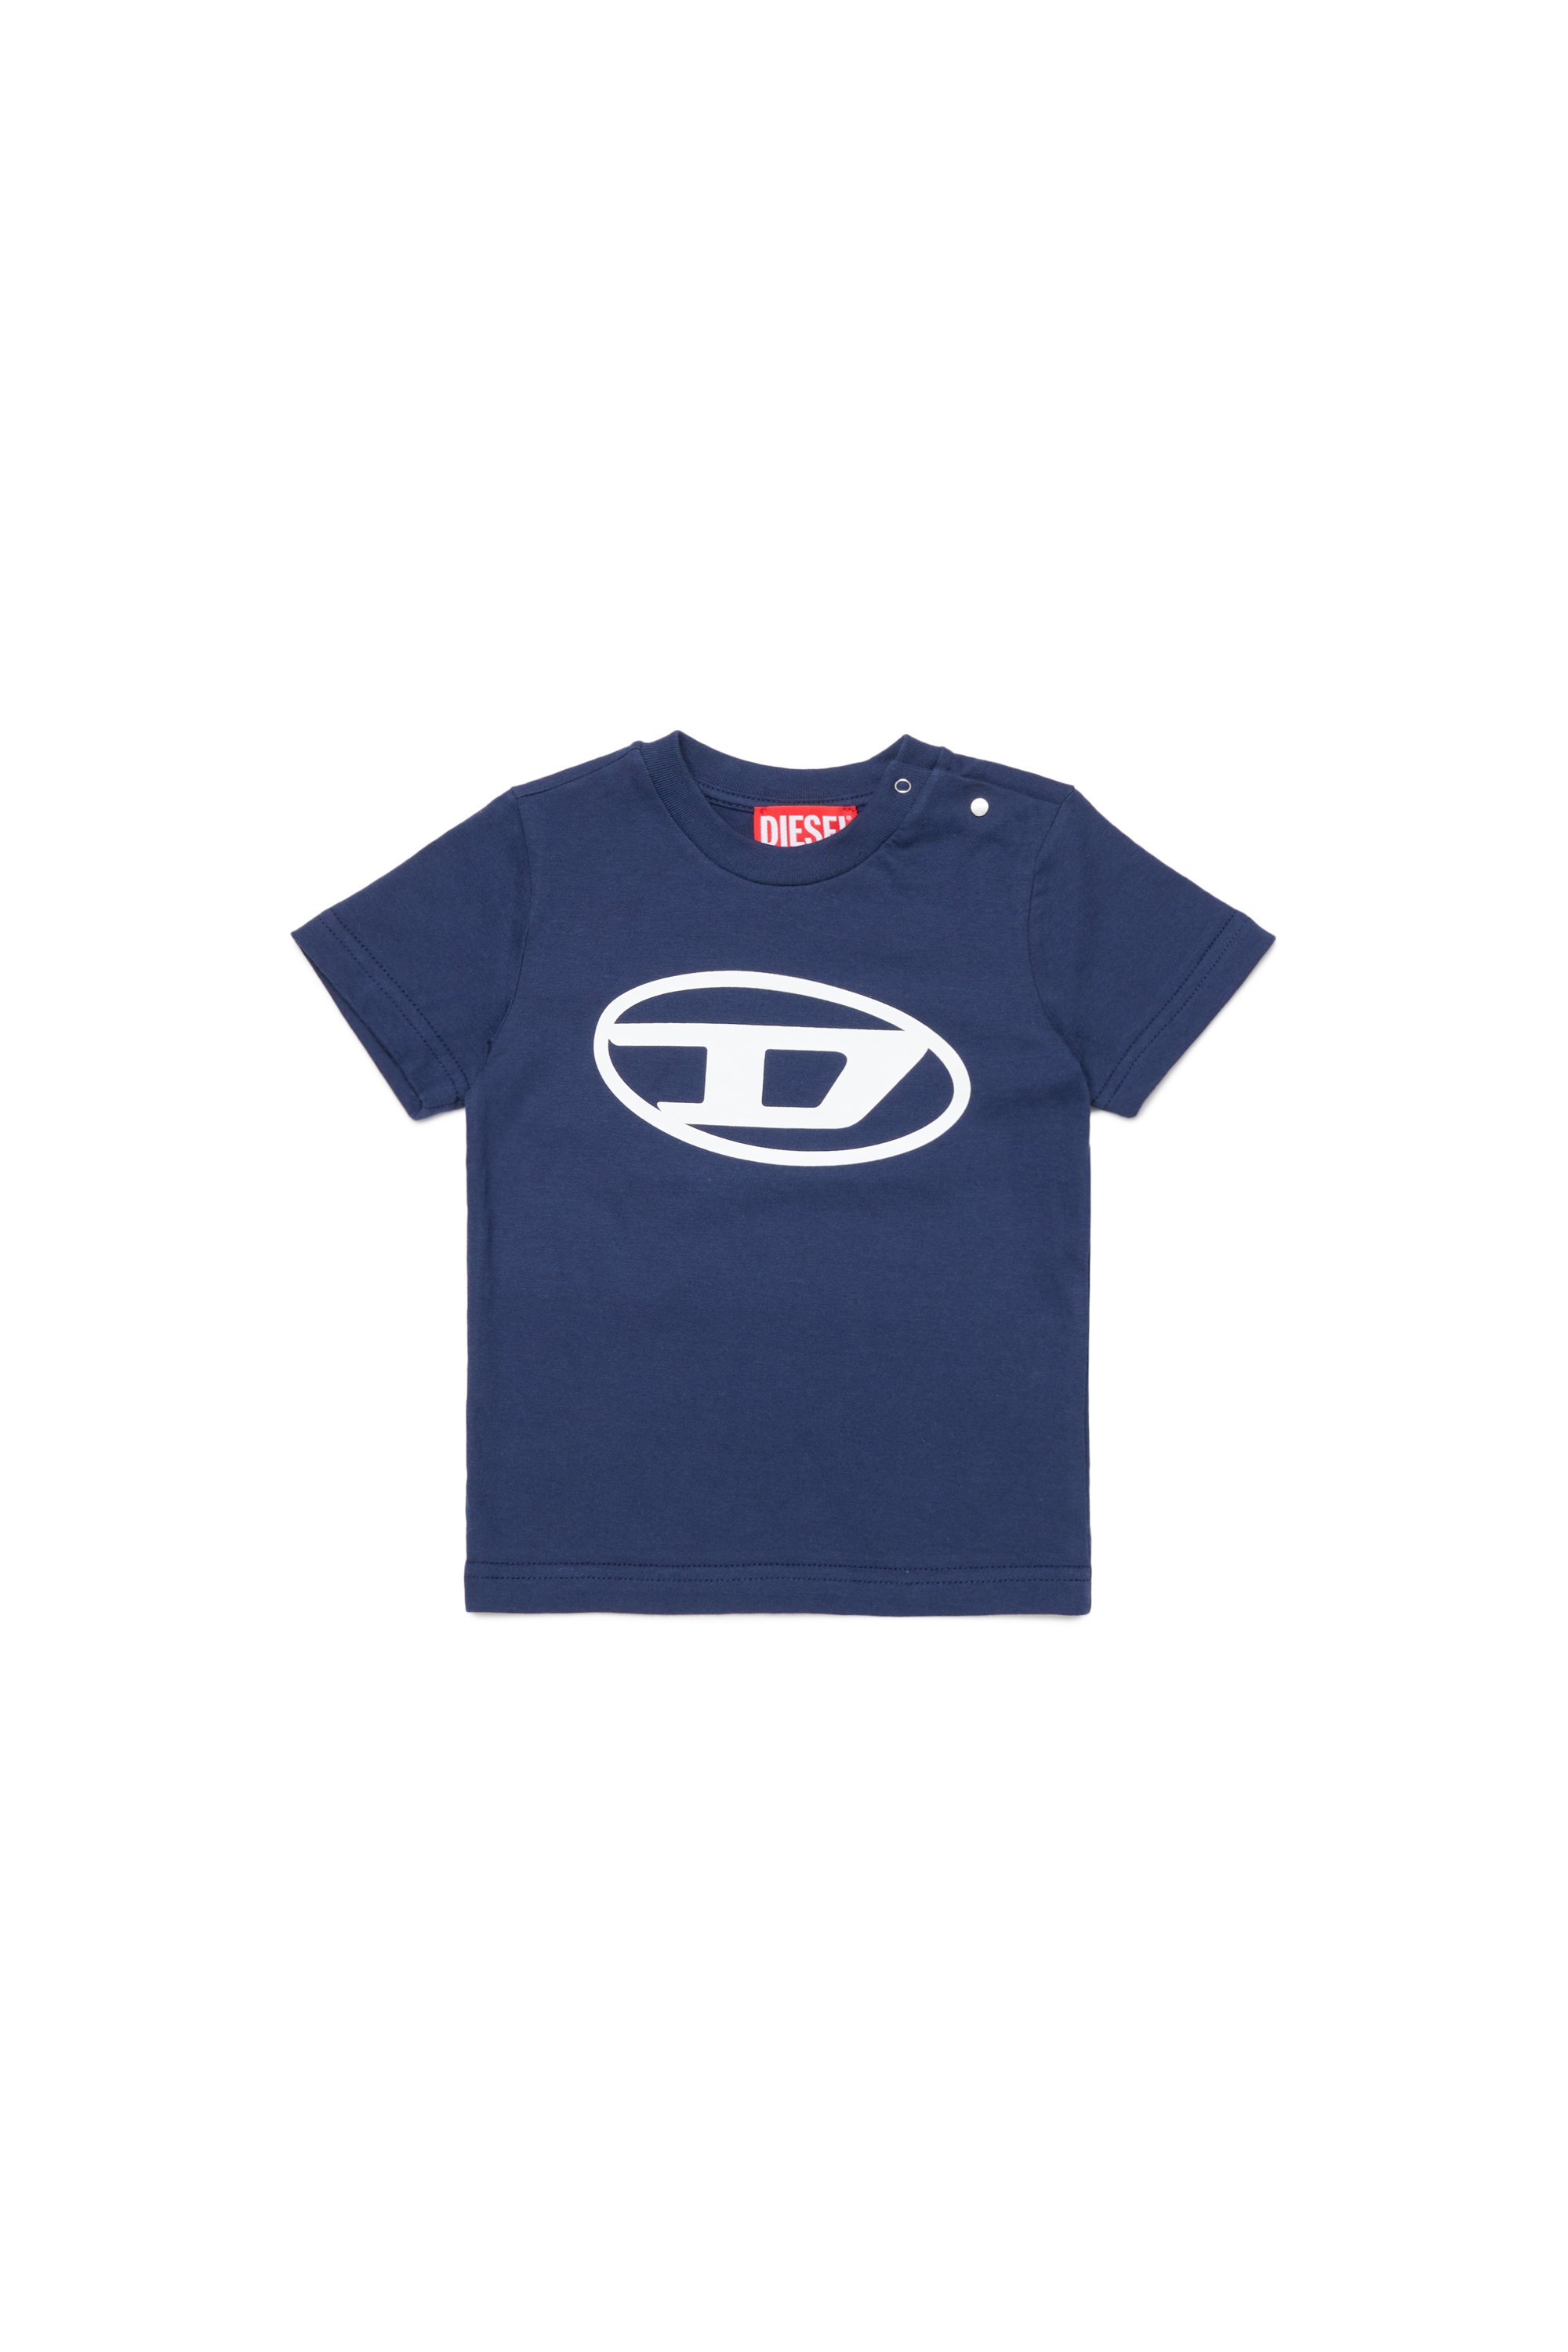 Diesel - T-shirt with Oval D logo - T-shirts and Tops - Unisex - Blue